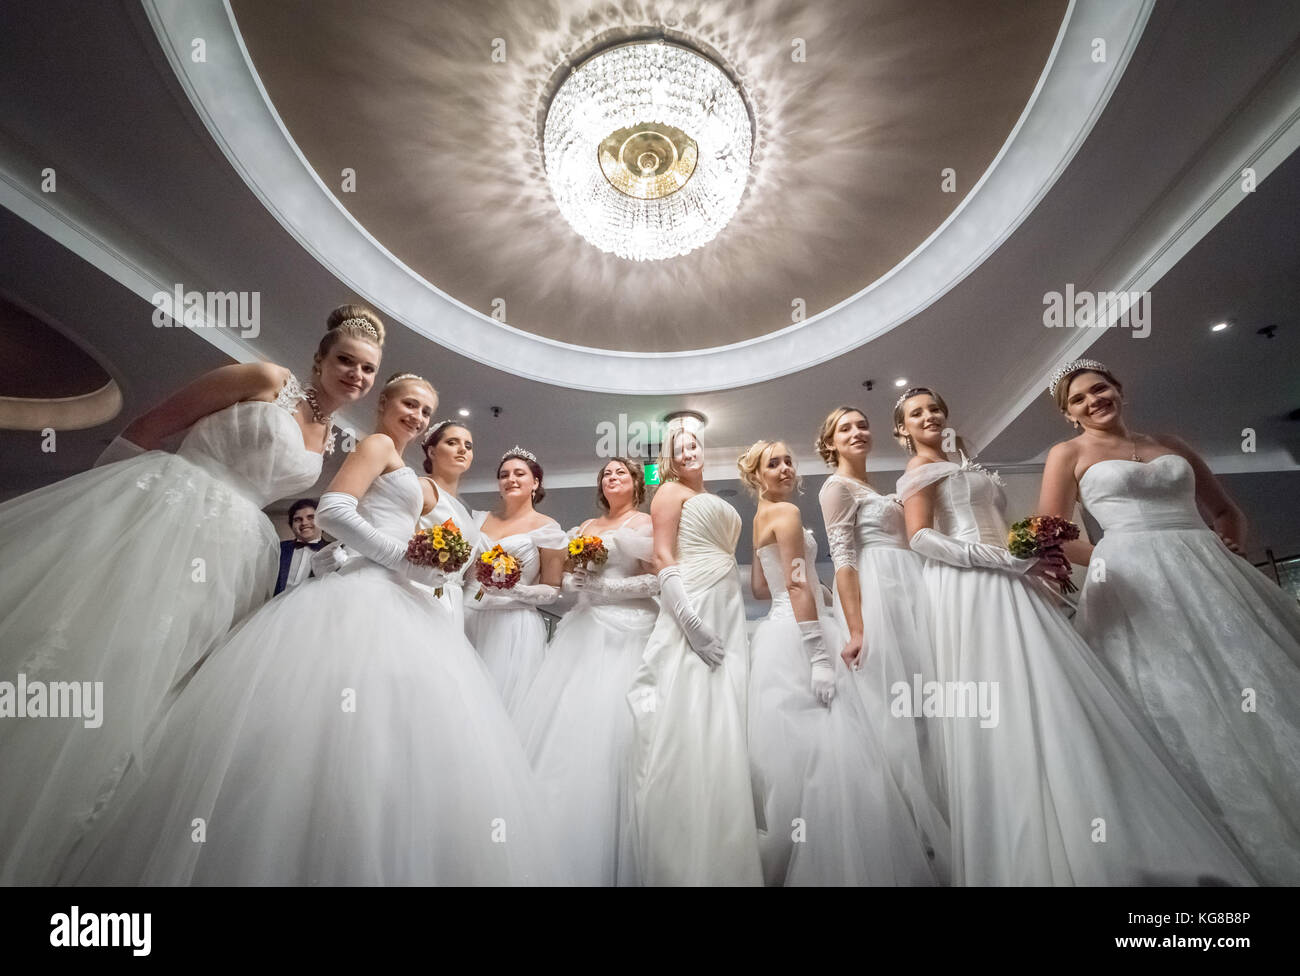 London, UK. 4th Nov, 2017. 5th Russian Debutante Ball, held at Mayfair’s Grosvenor House Hotel, Park Lane, London. Twenty-five debutante couples, aged between 16-25, wore the strict dress code of floor-length white bridal gowns, matching gloves and compulsory tiaras. © Guy Corbishley/Alamy Live News Stock Photo